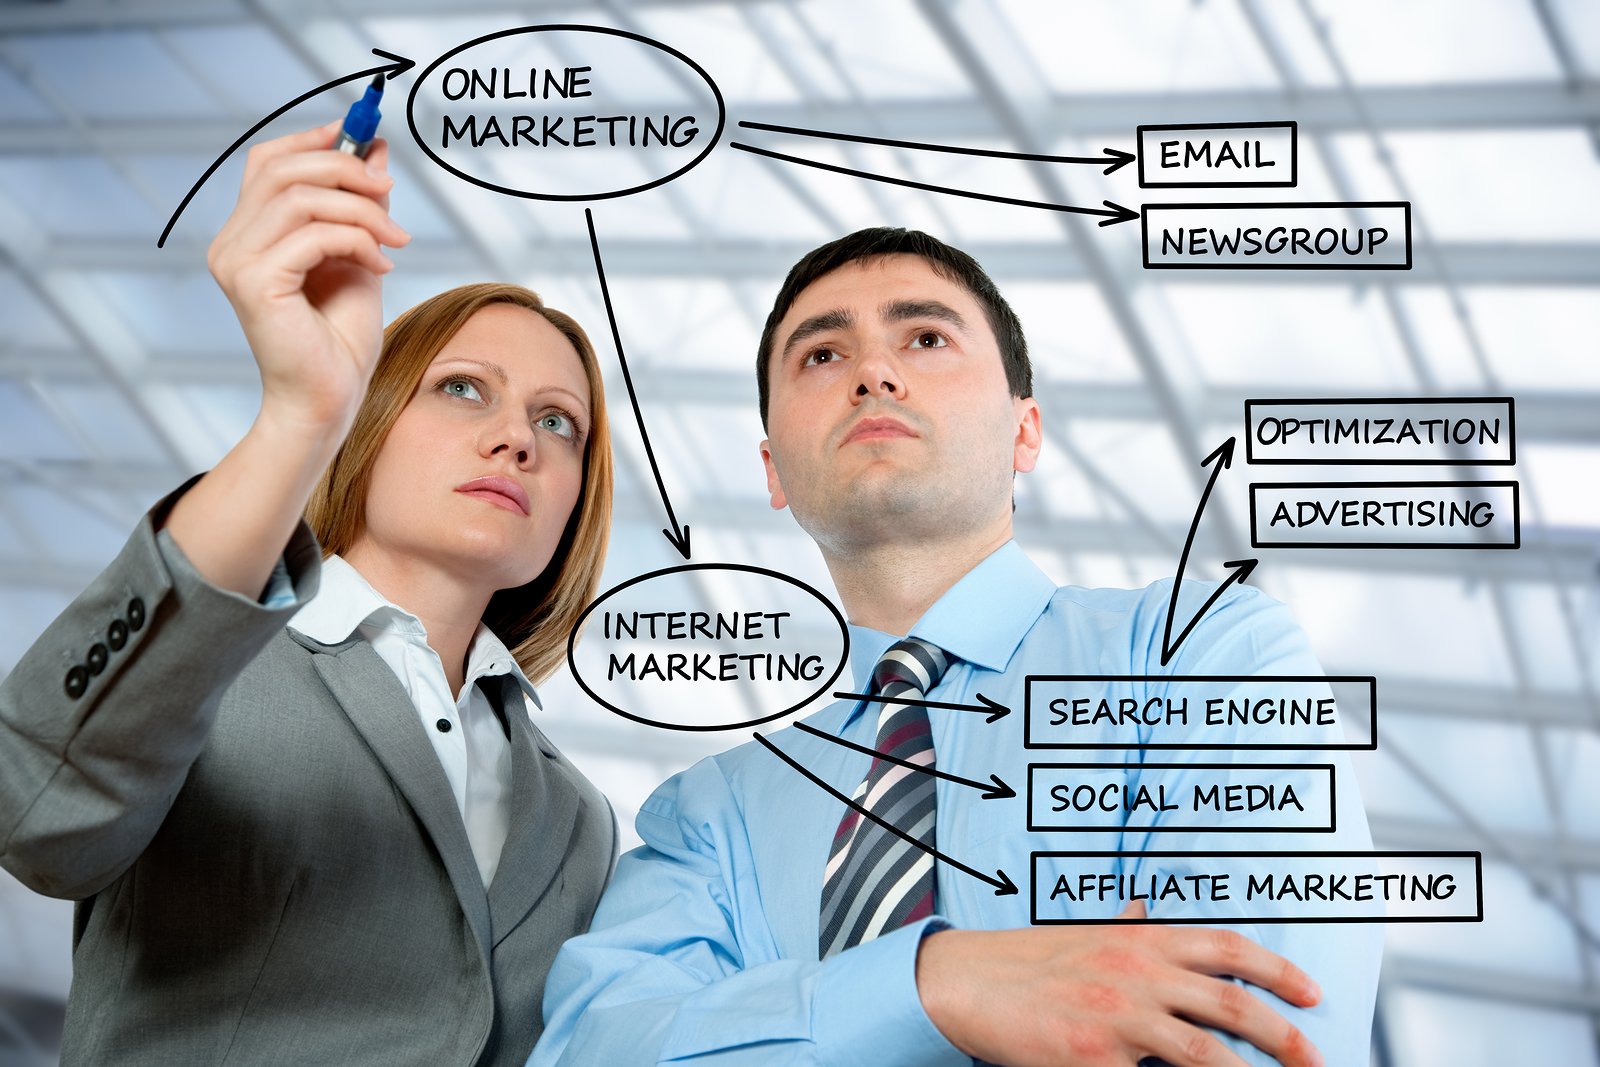 Tips to Become an Internet Marketing Expert